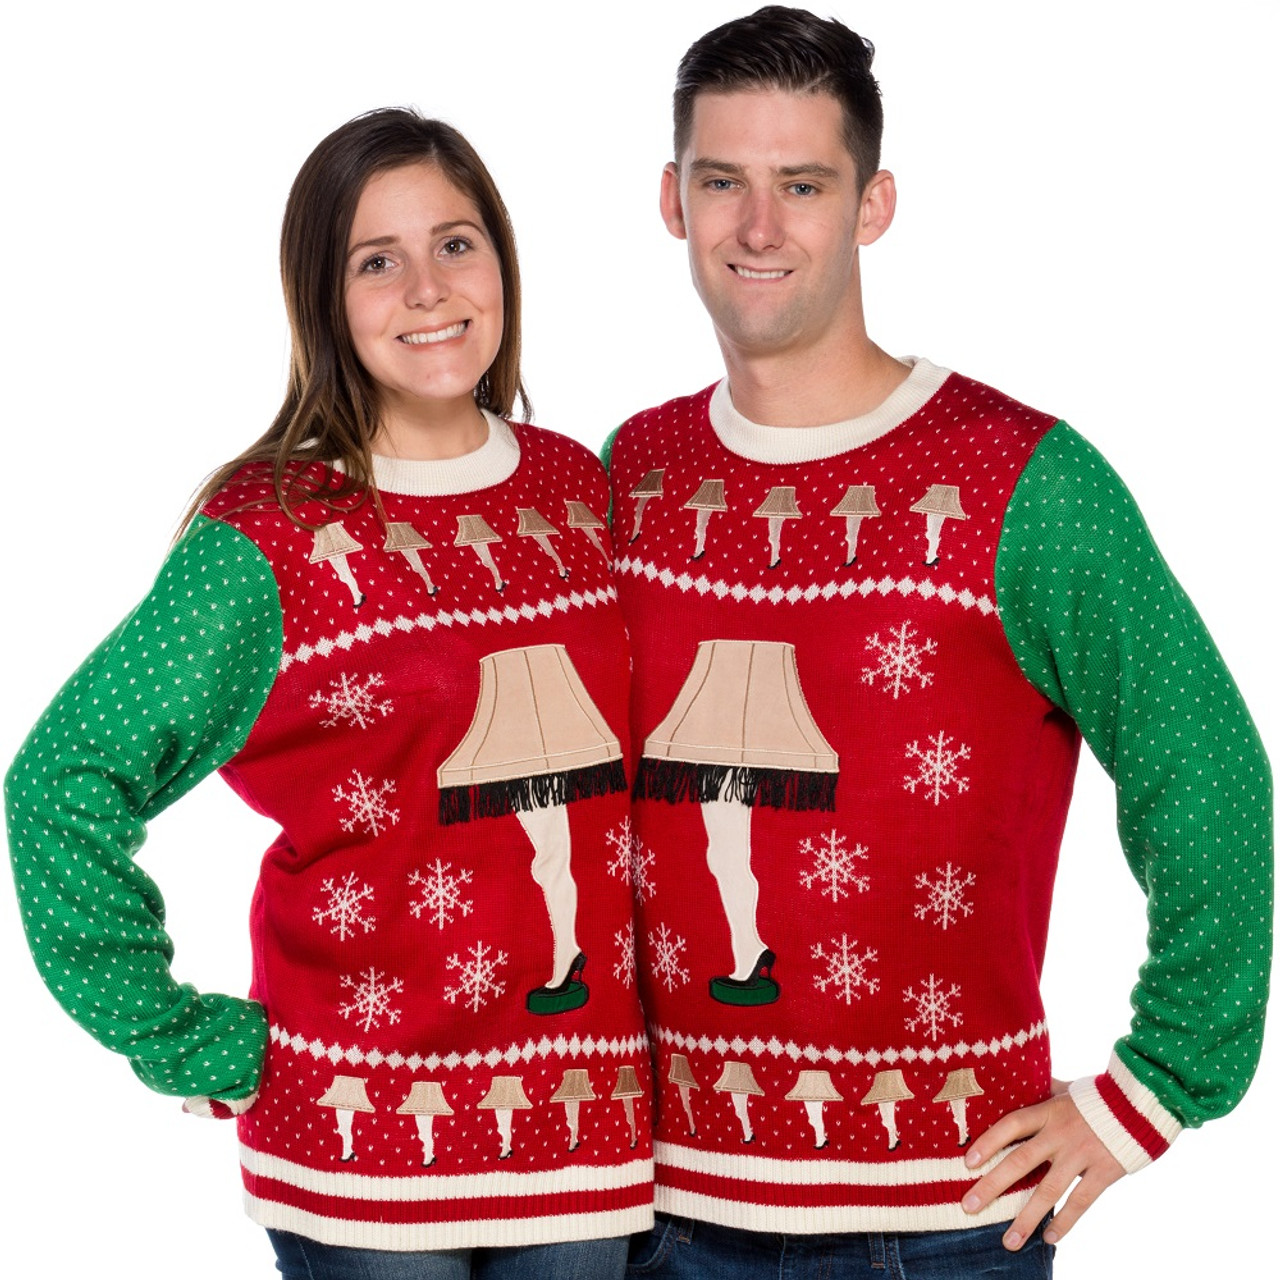 Christmas Super Mario Bros. ,Ugly Sweater Party,ugly sweater ideas